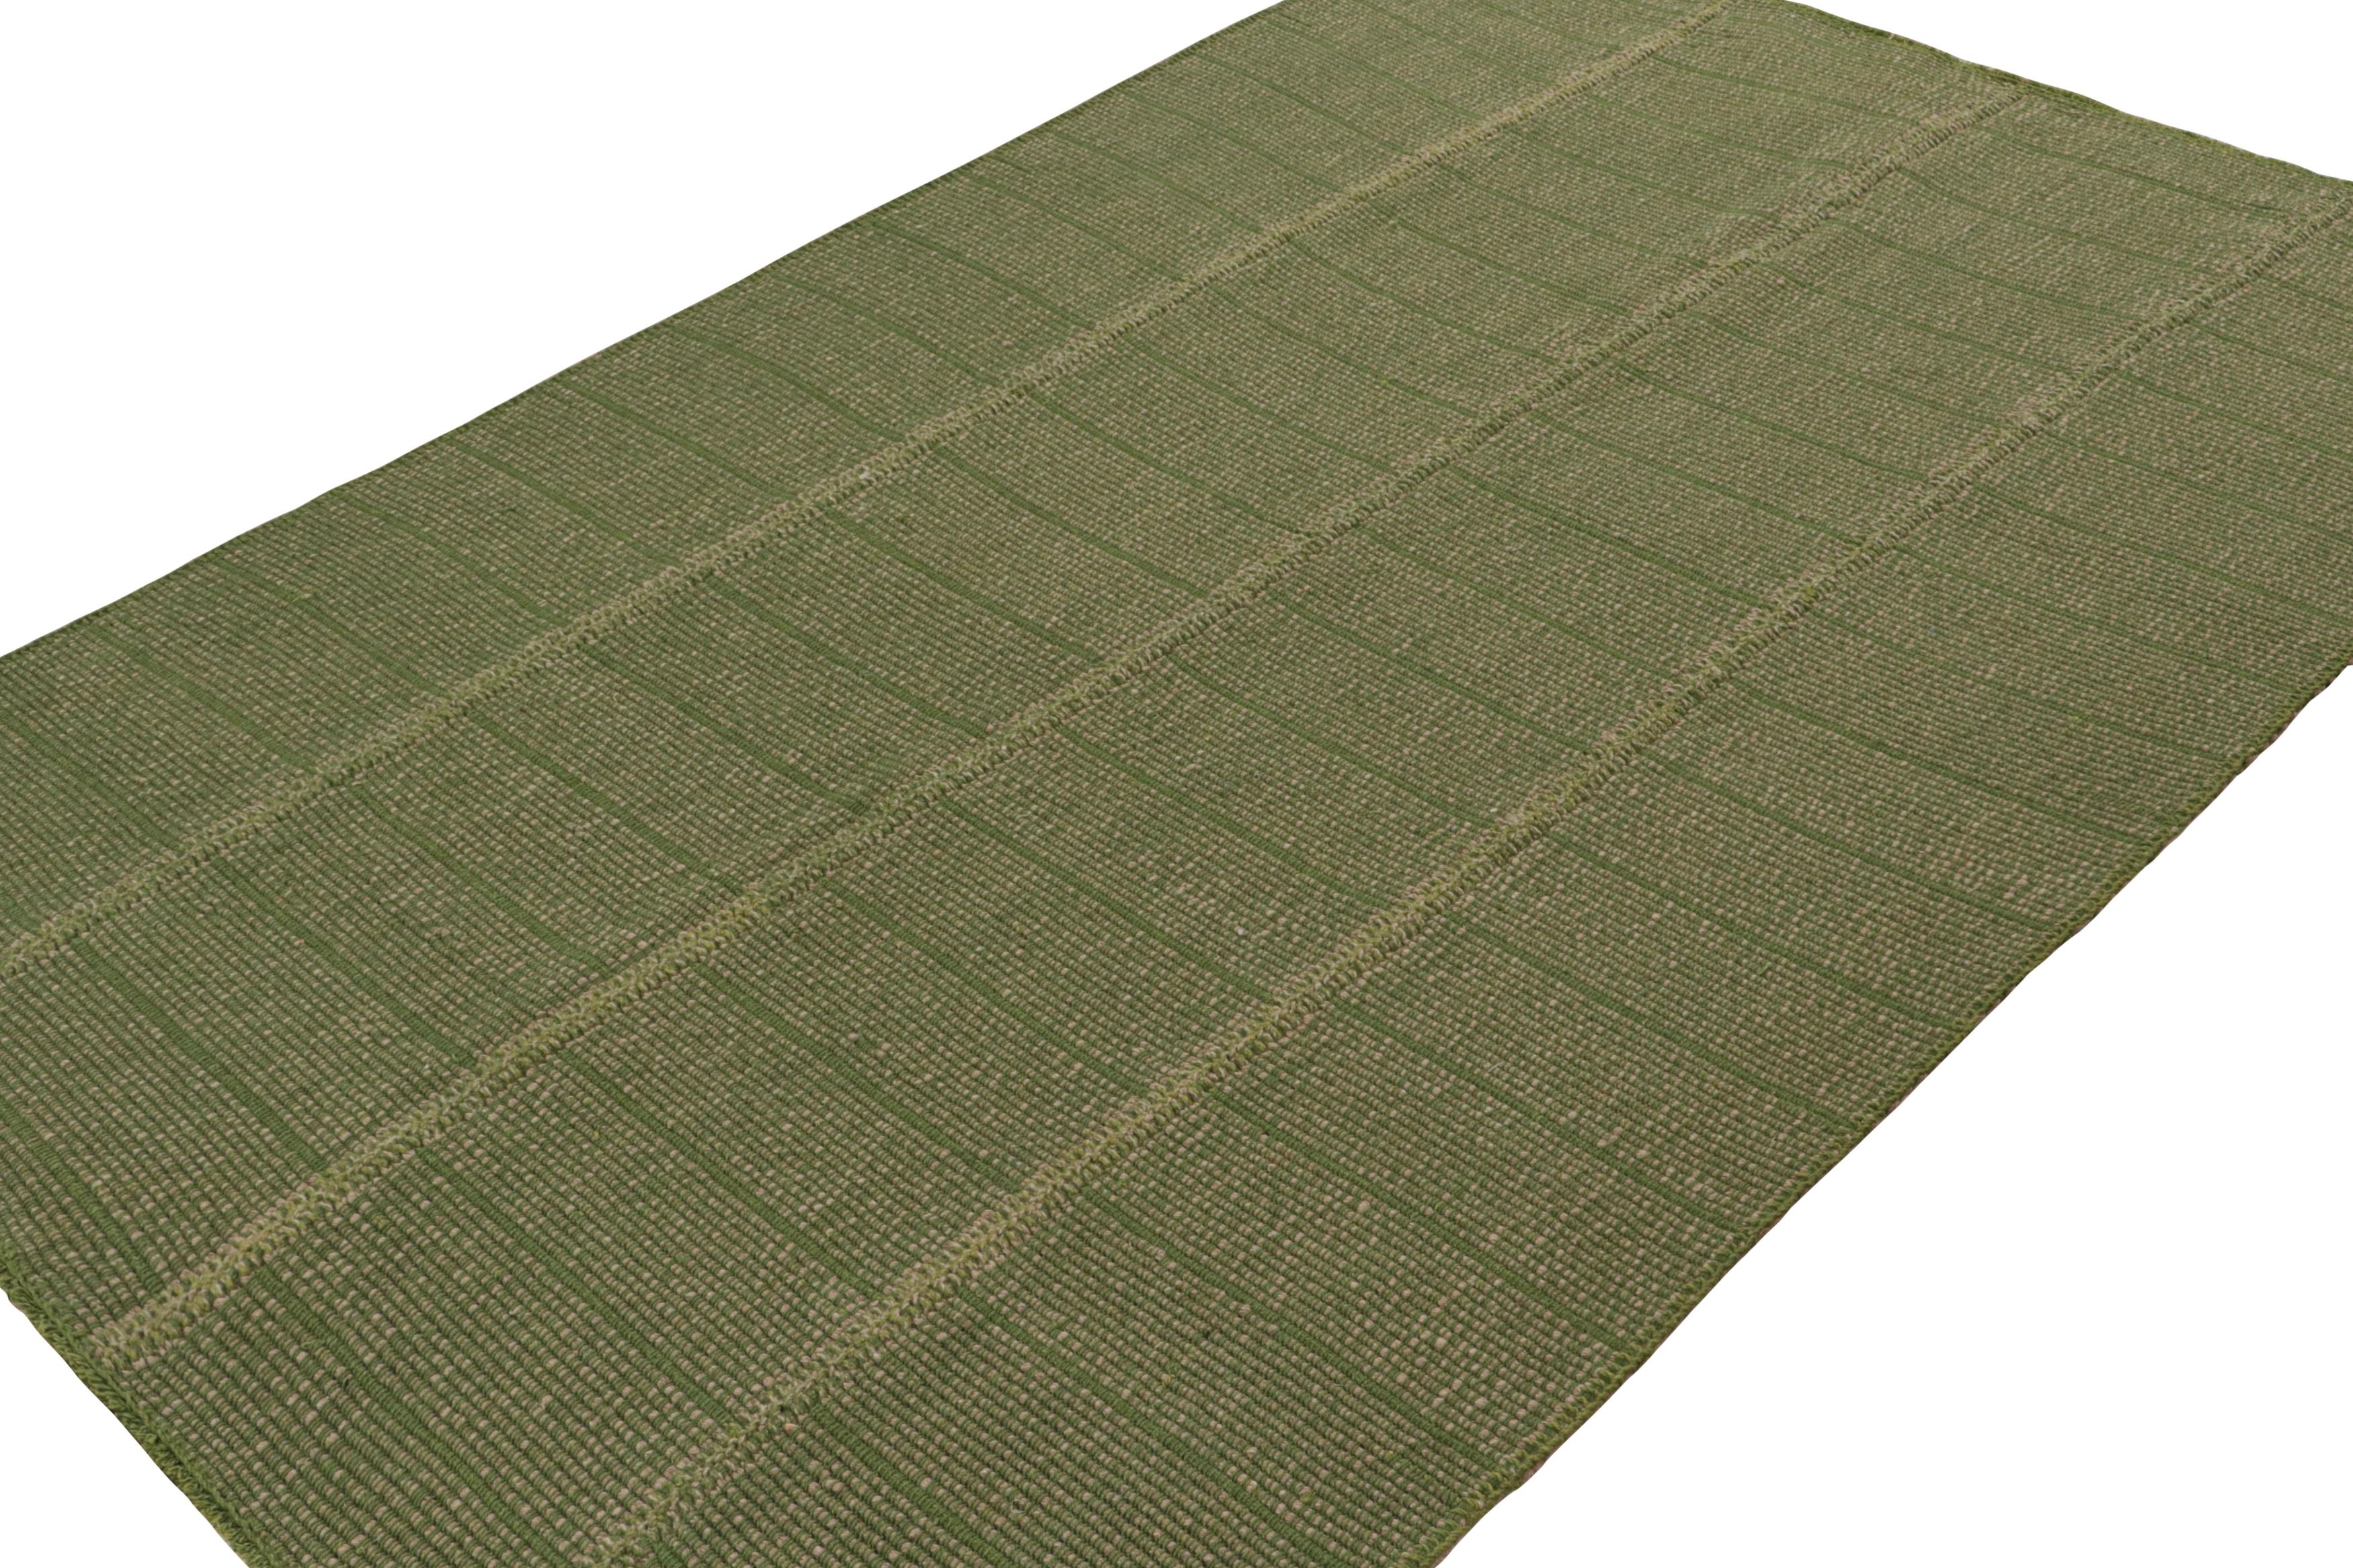 Handwoven in wool, a 6x9 Kilim in Green with Beige accents, from a bold new line of contemporary flatweaves, ‘Rez Kilim’, by Rug & Kilim.

On the Design: 

Connoting a modern take on classic panel-weaving, our latest “Rez Kilim” enjoys green and